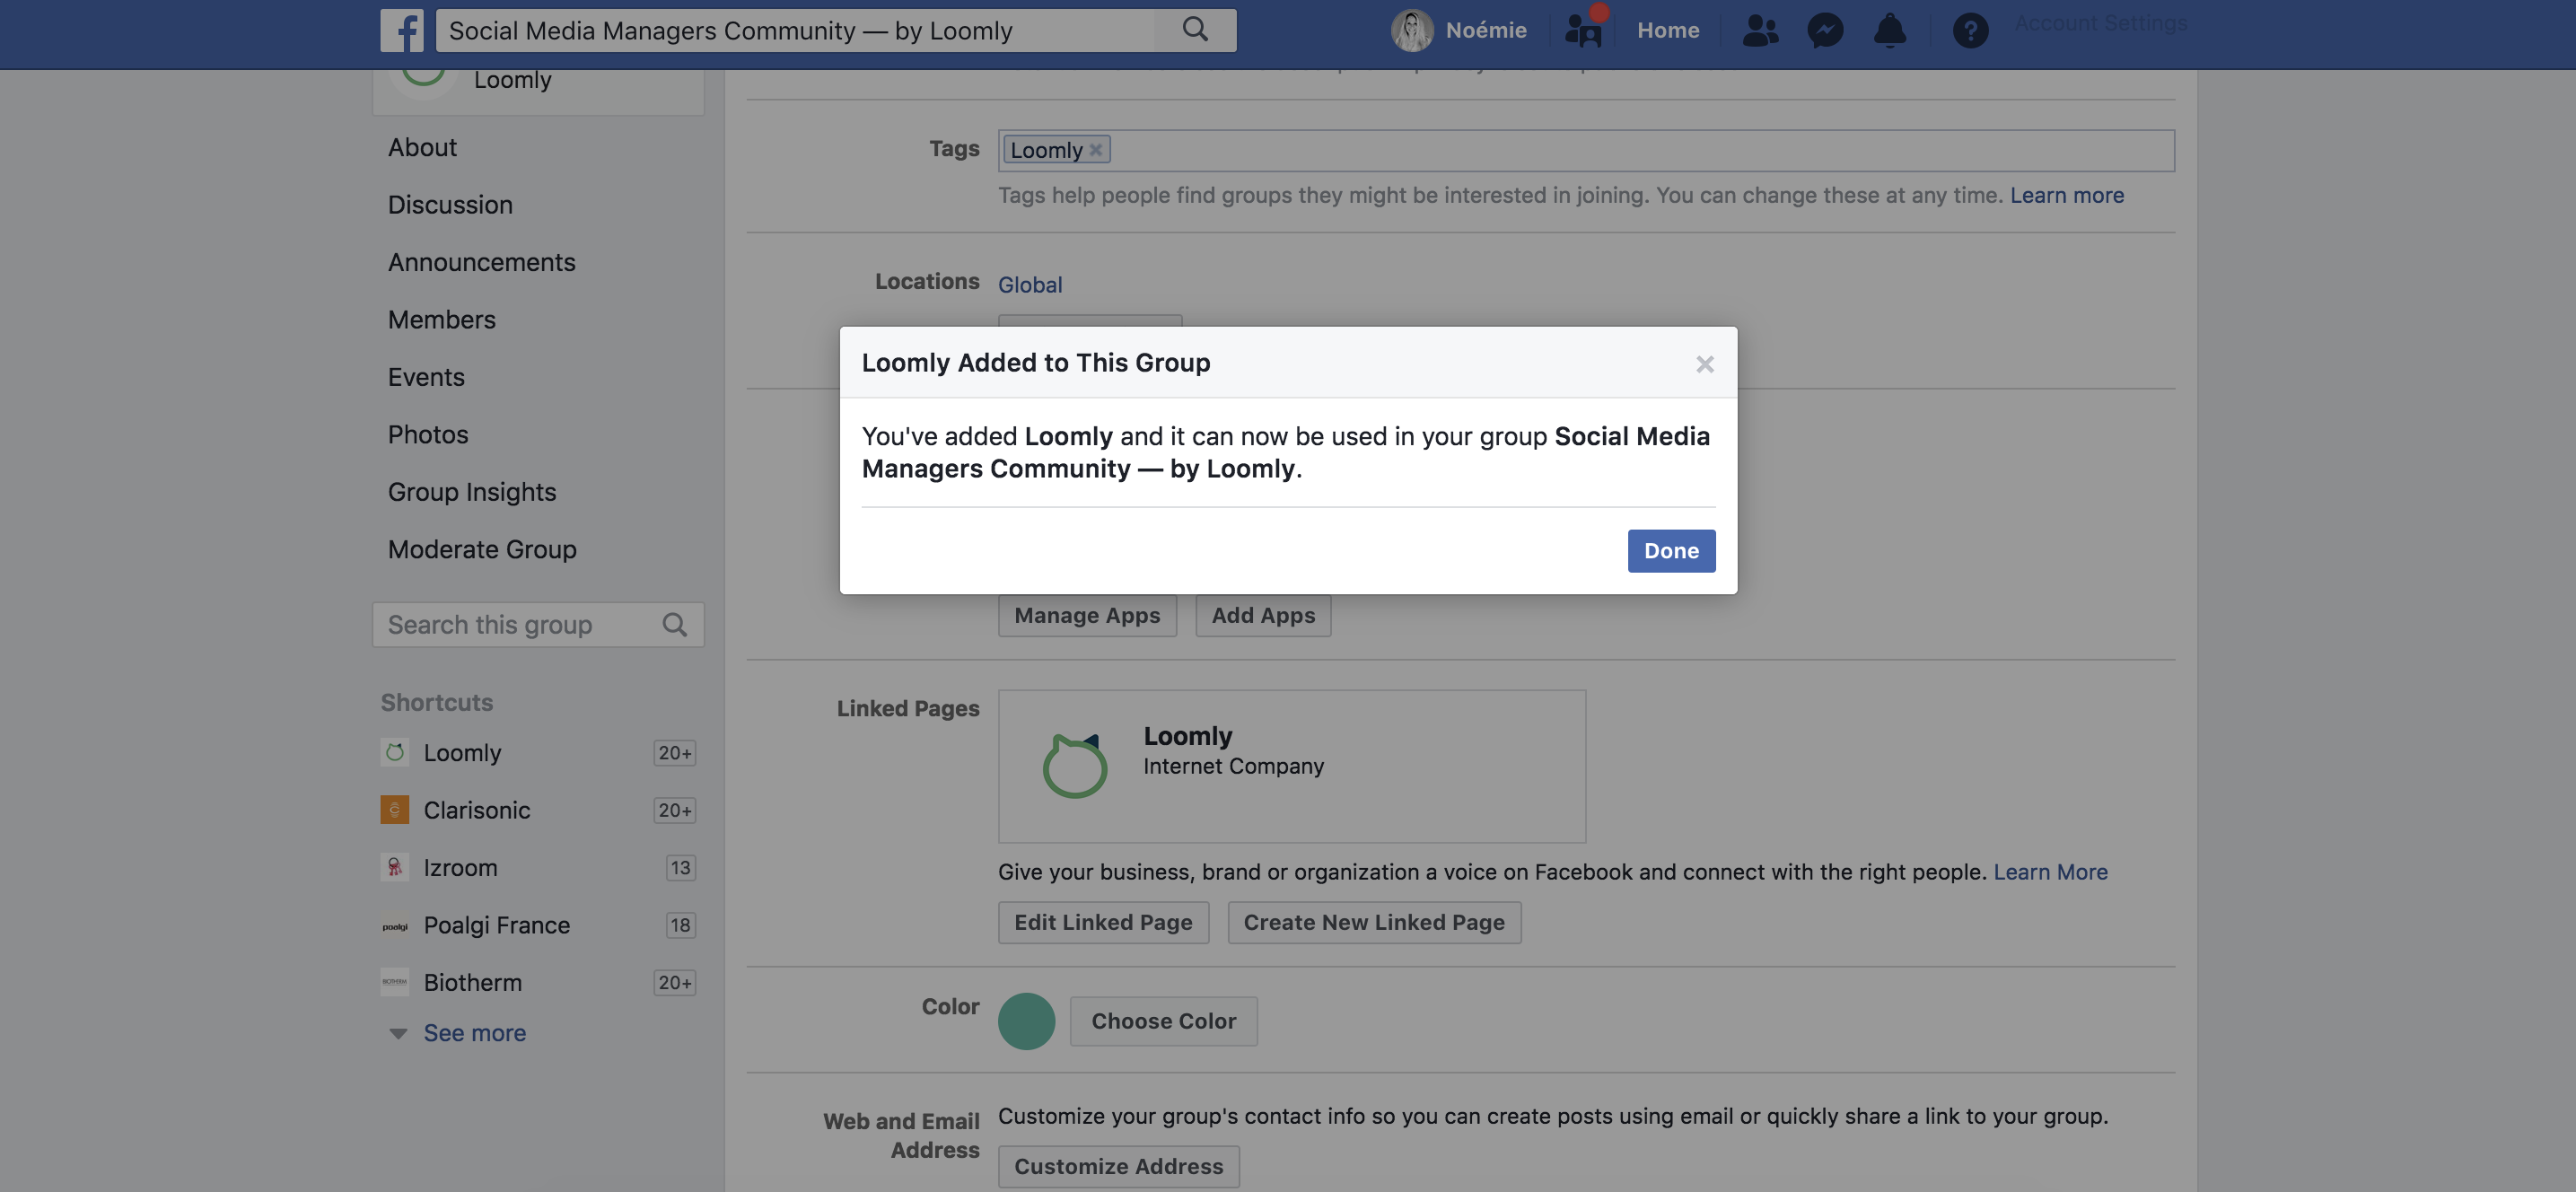 Publishing to Facebook Groups done